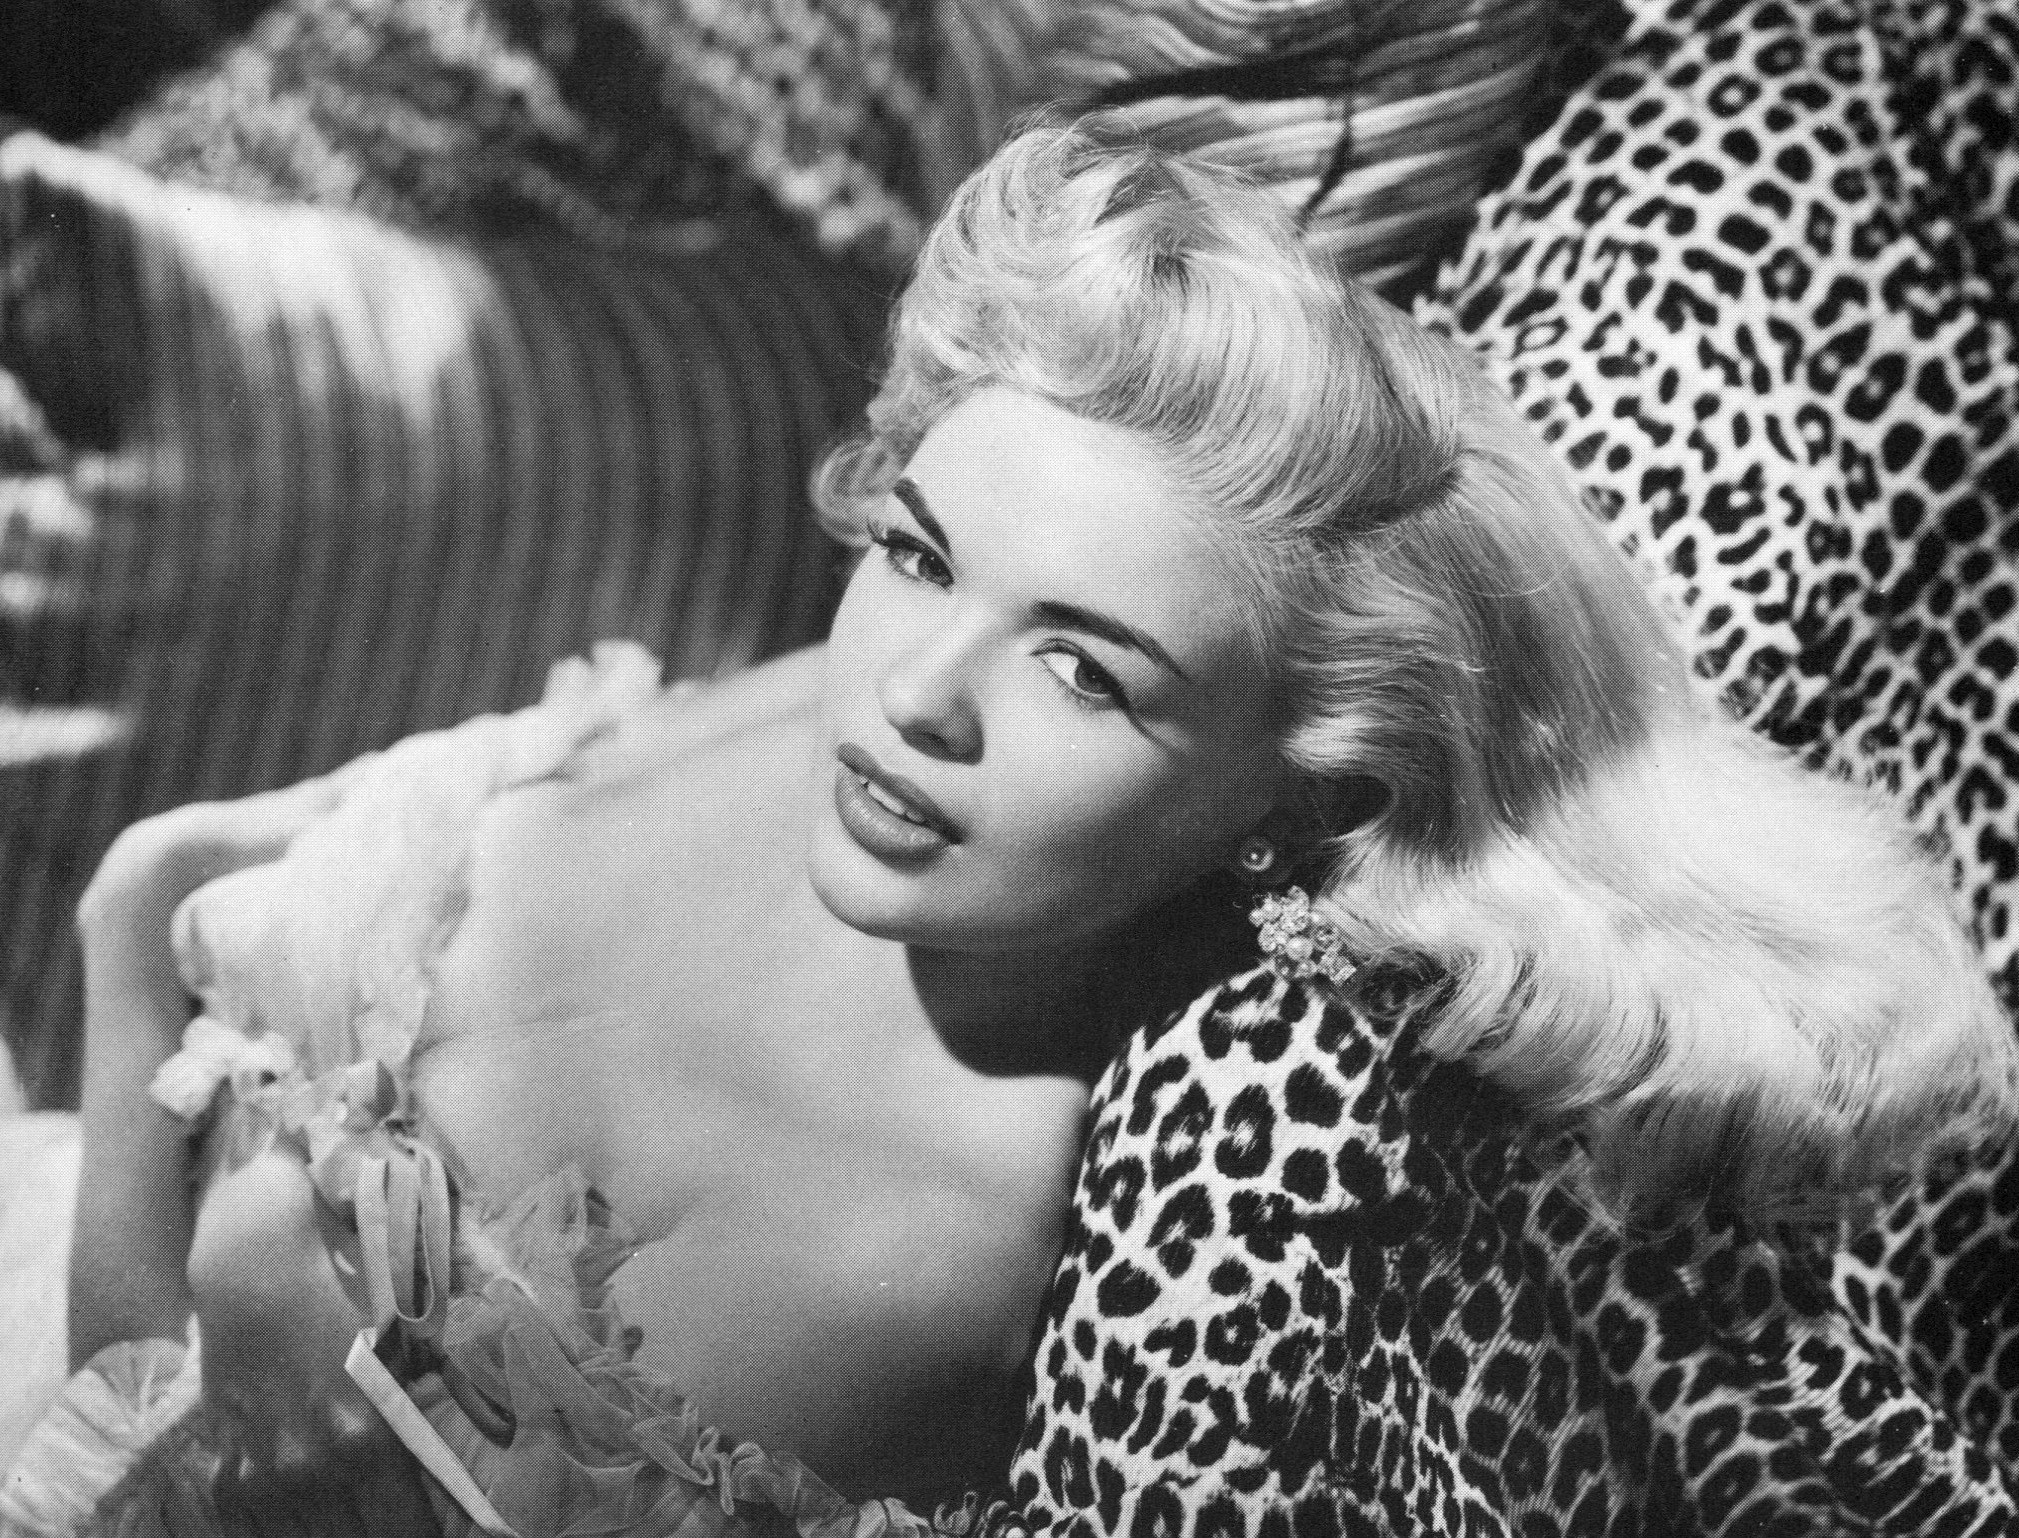 THE DEVIL MADE HER DO IT WHO WAS THE REAL JAYNE MANSFIELD? THE UNTITLED MAGAZINE